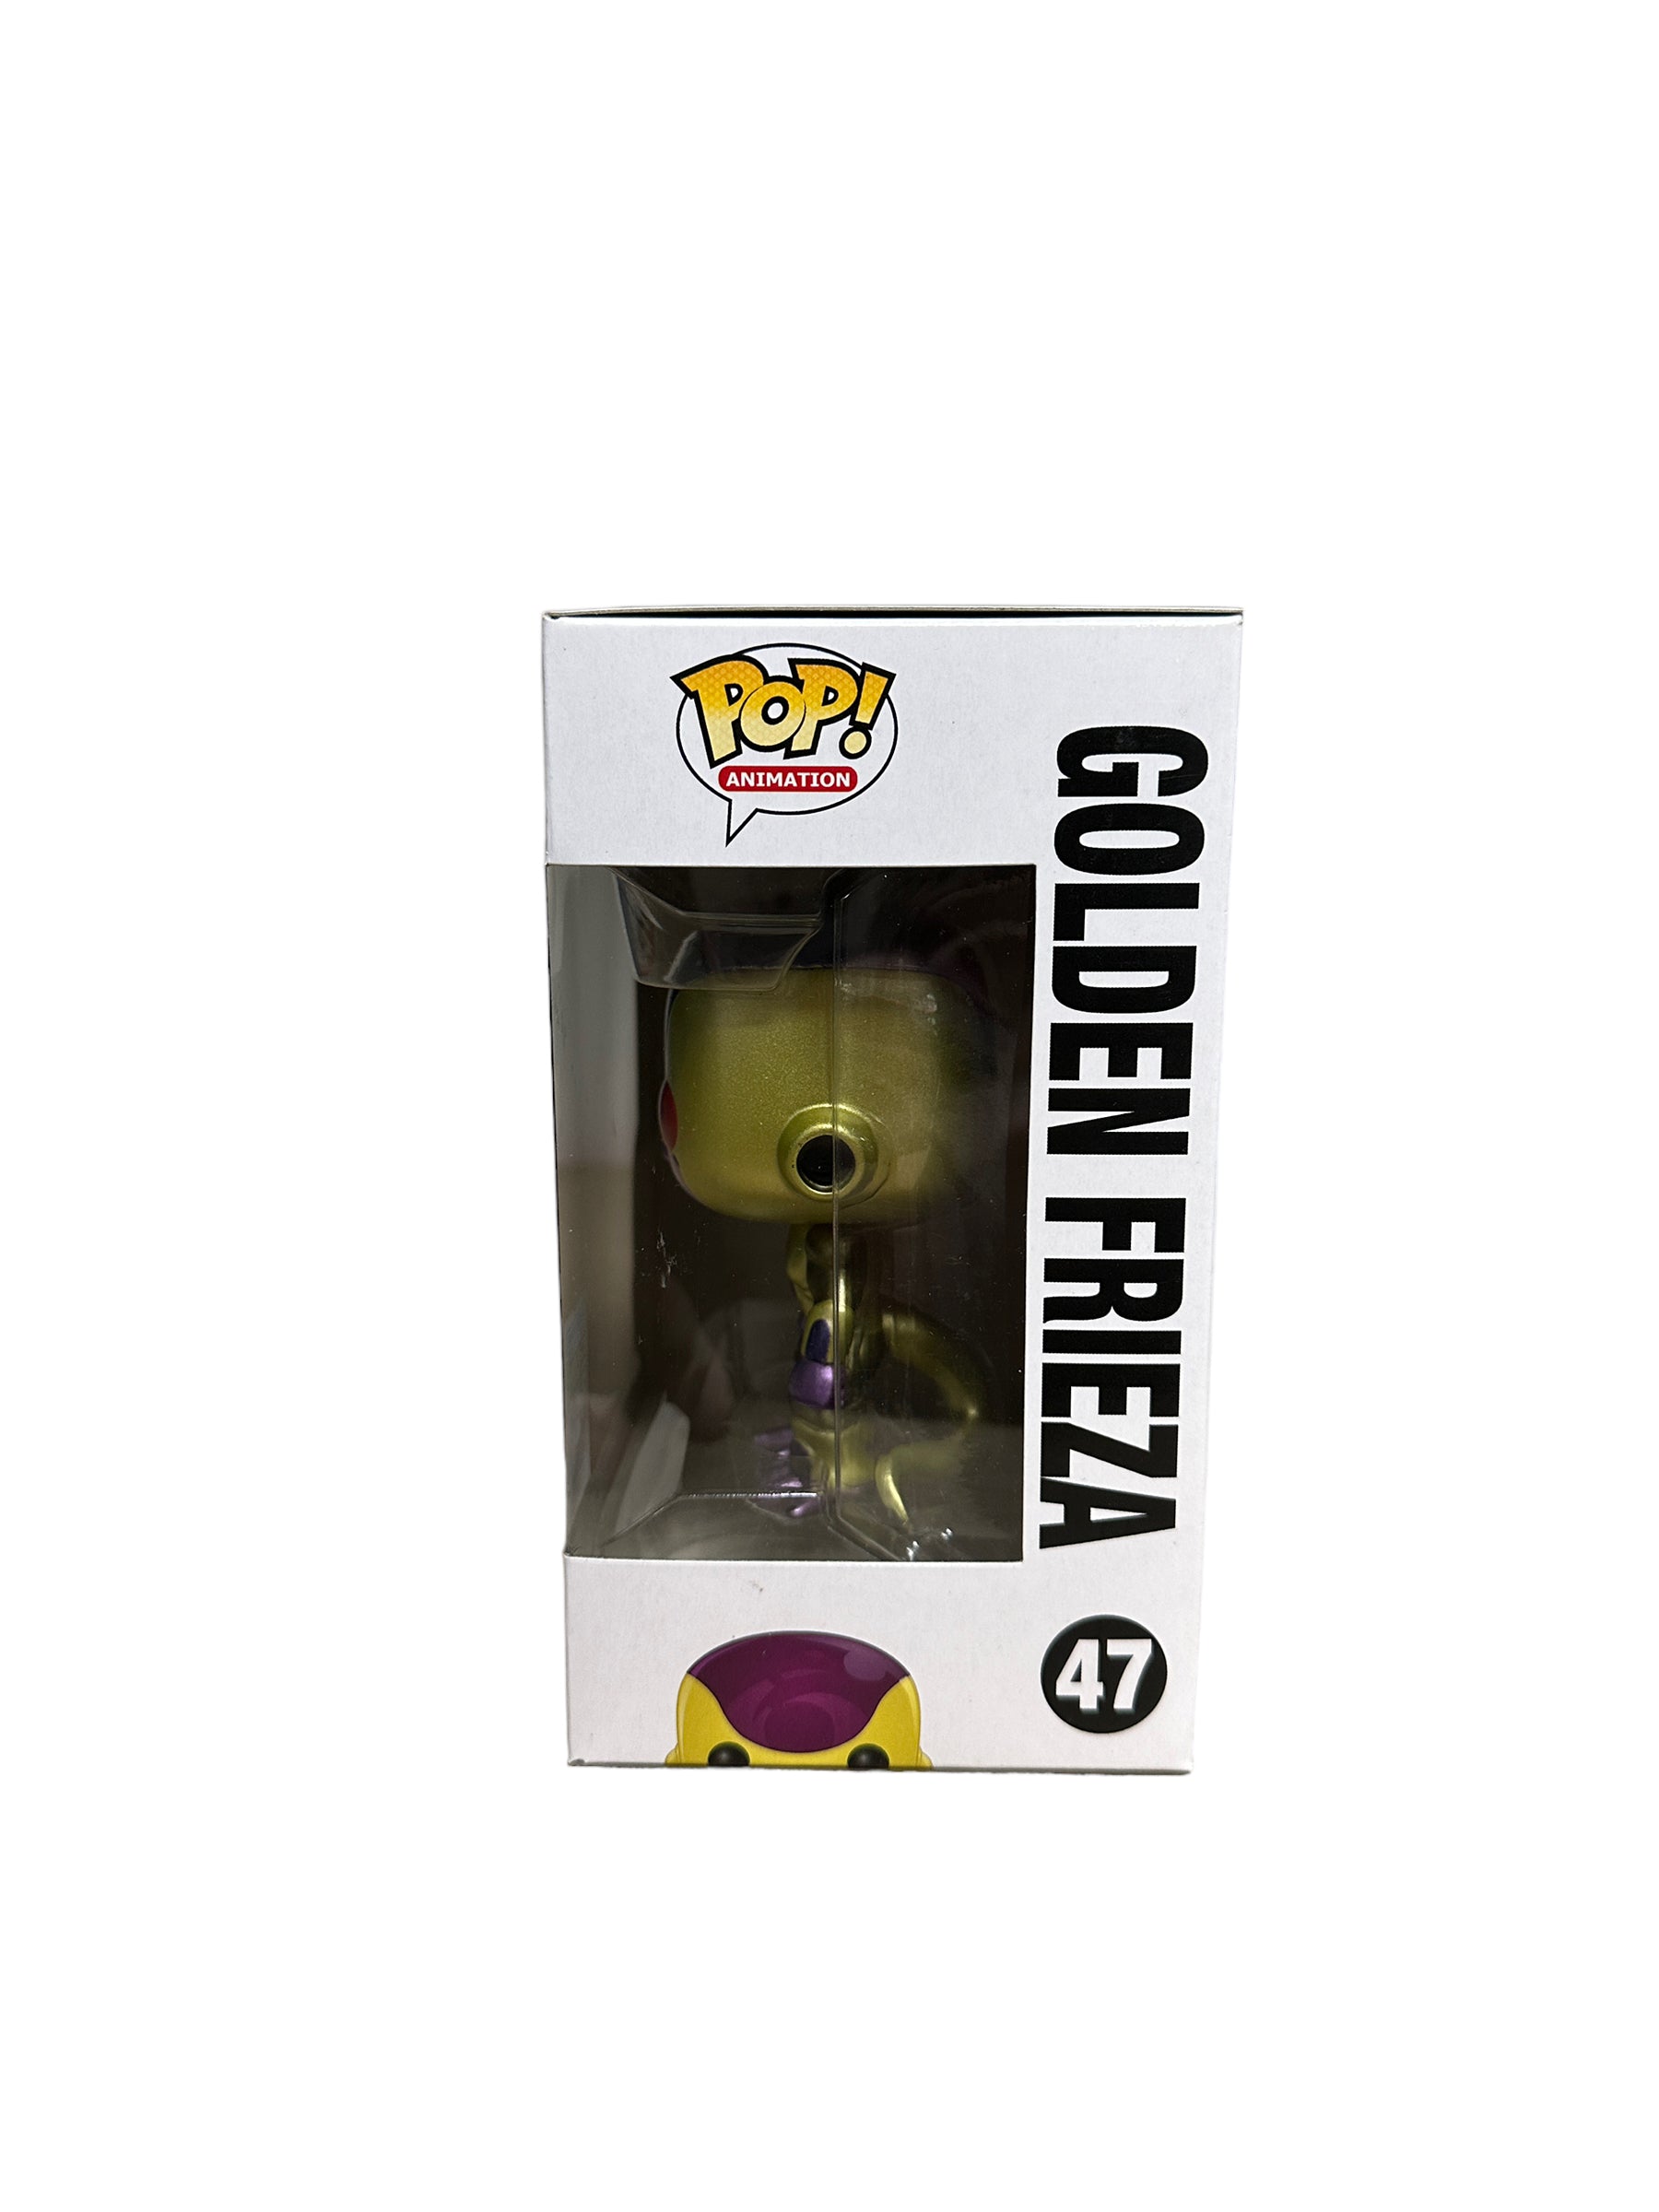 Golden Frieza #47 (Red Eyes) Funko Pop! - Dragon Ball Z Resurrection 'F' - SDCC 2015 Official Convention Exclusive - Condition 8.75/10